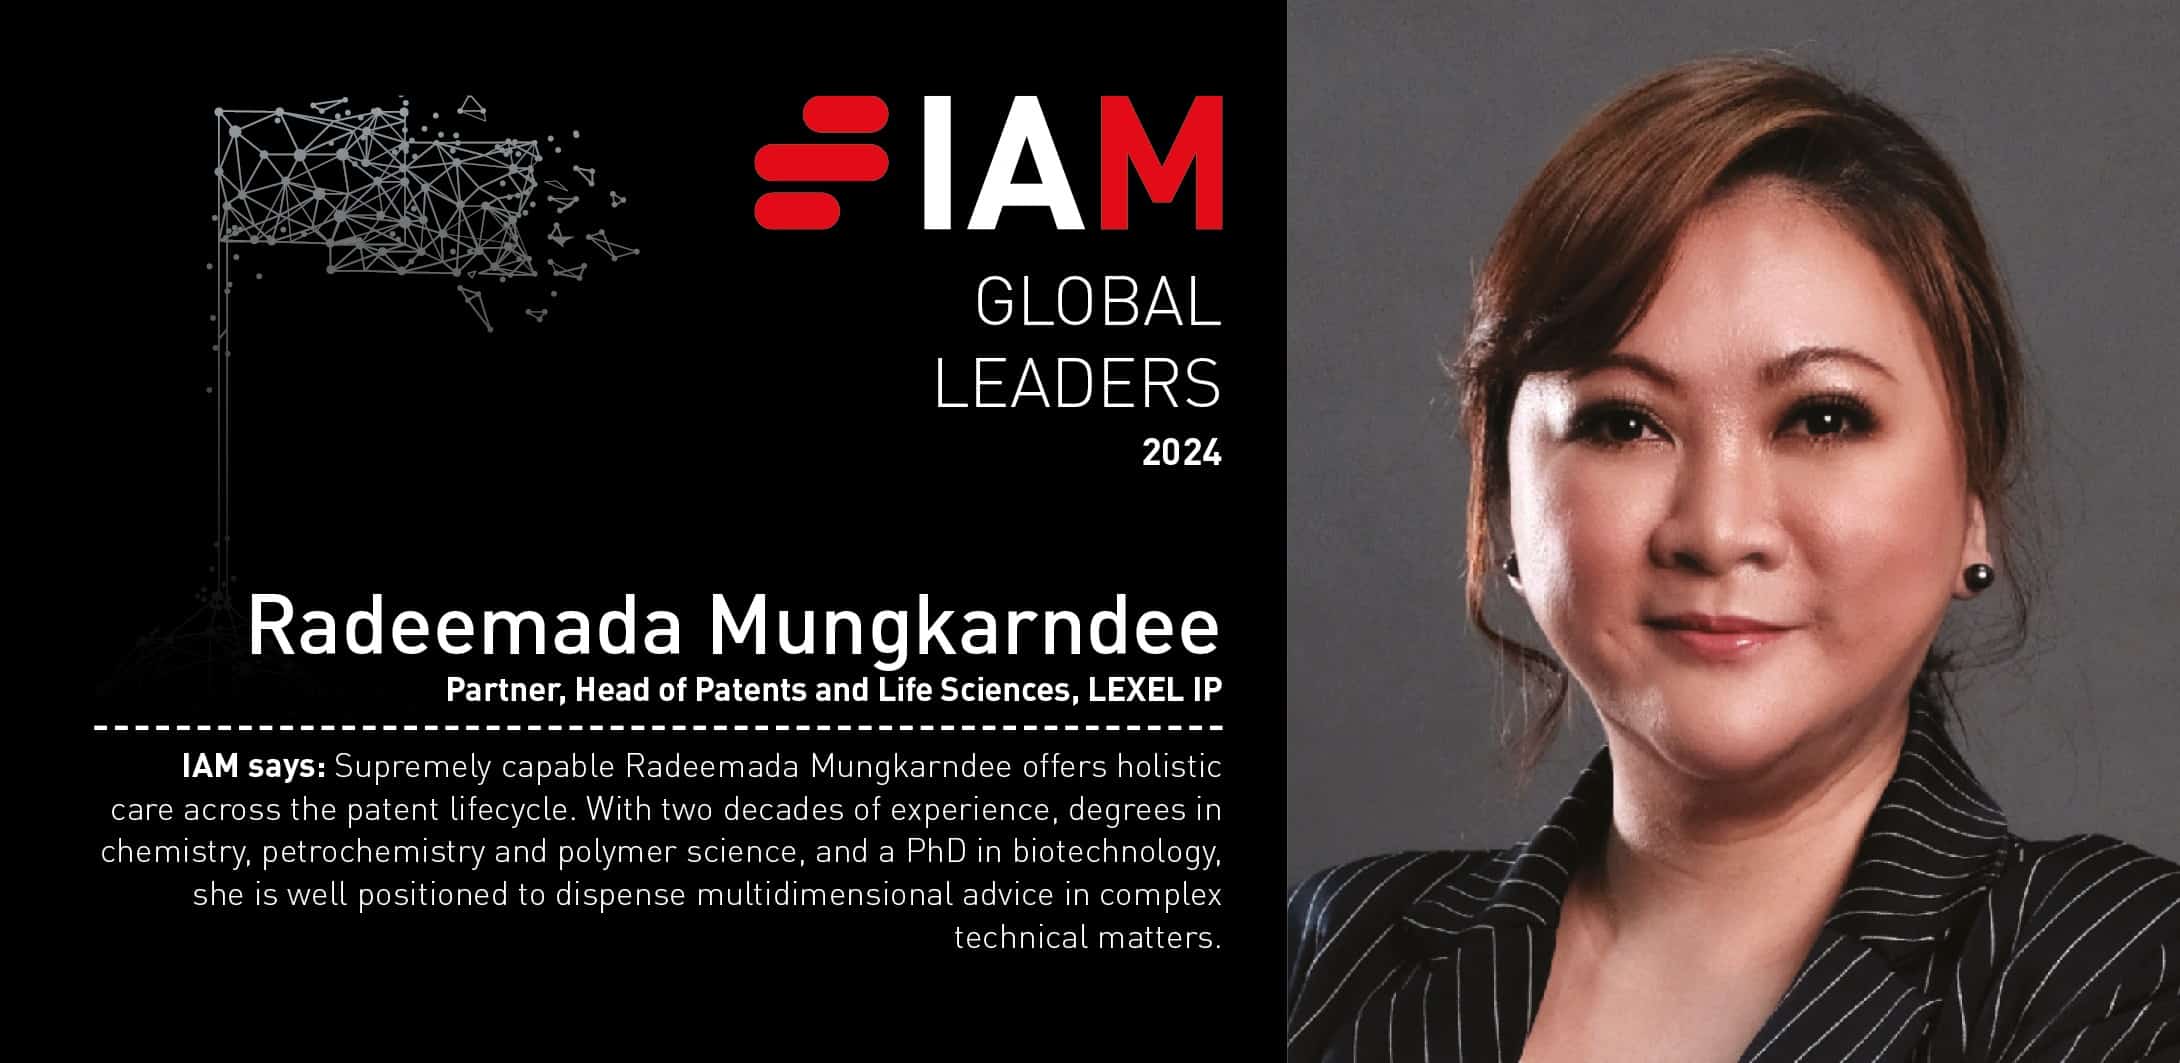 LEXEL Proudly Celebrates Dr. Radeemada Mungkarndee's Recognition as an IAM Global Leader 2024 in Patent Practice